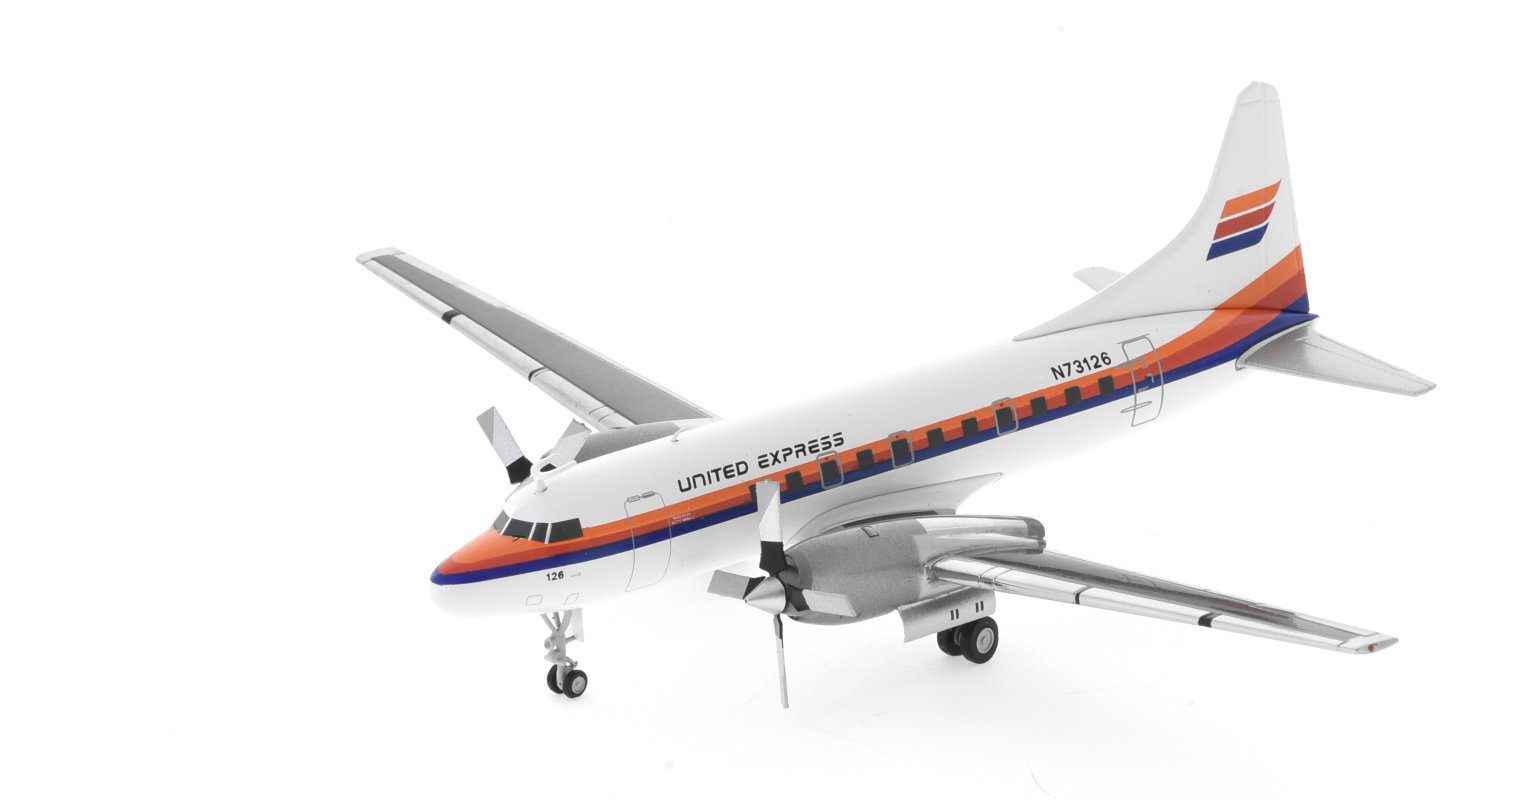 Front port side view of Gemini Jets G2UAL318 - 1/200 scale diecast model of the Convair CV-580, registration N73126 operated by Aspen Airways in the livery of United Express